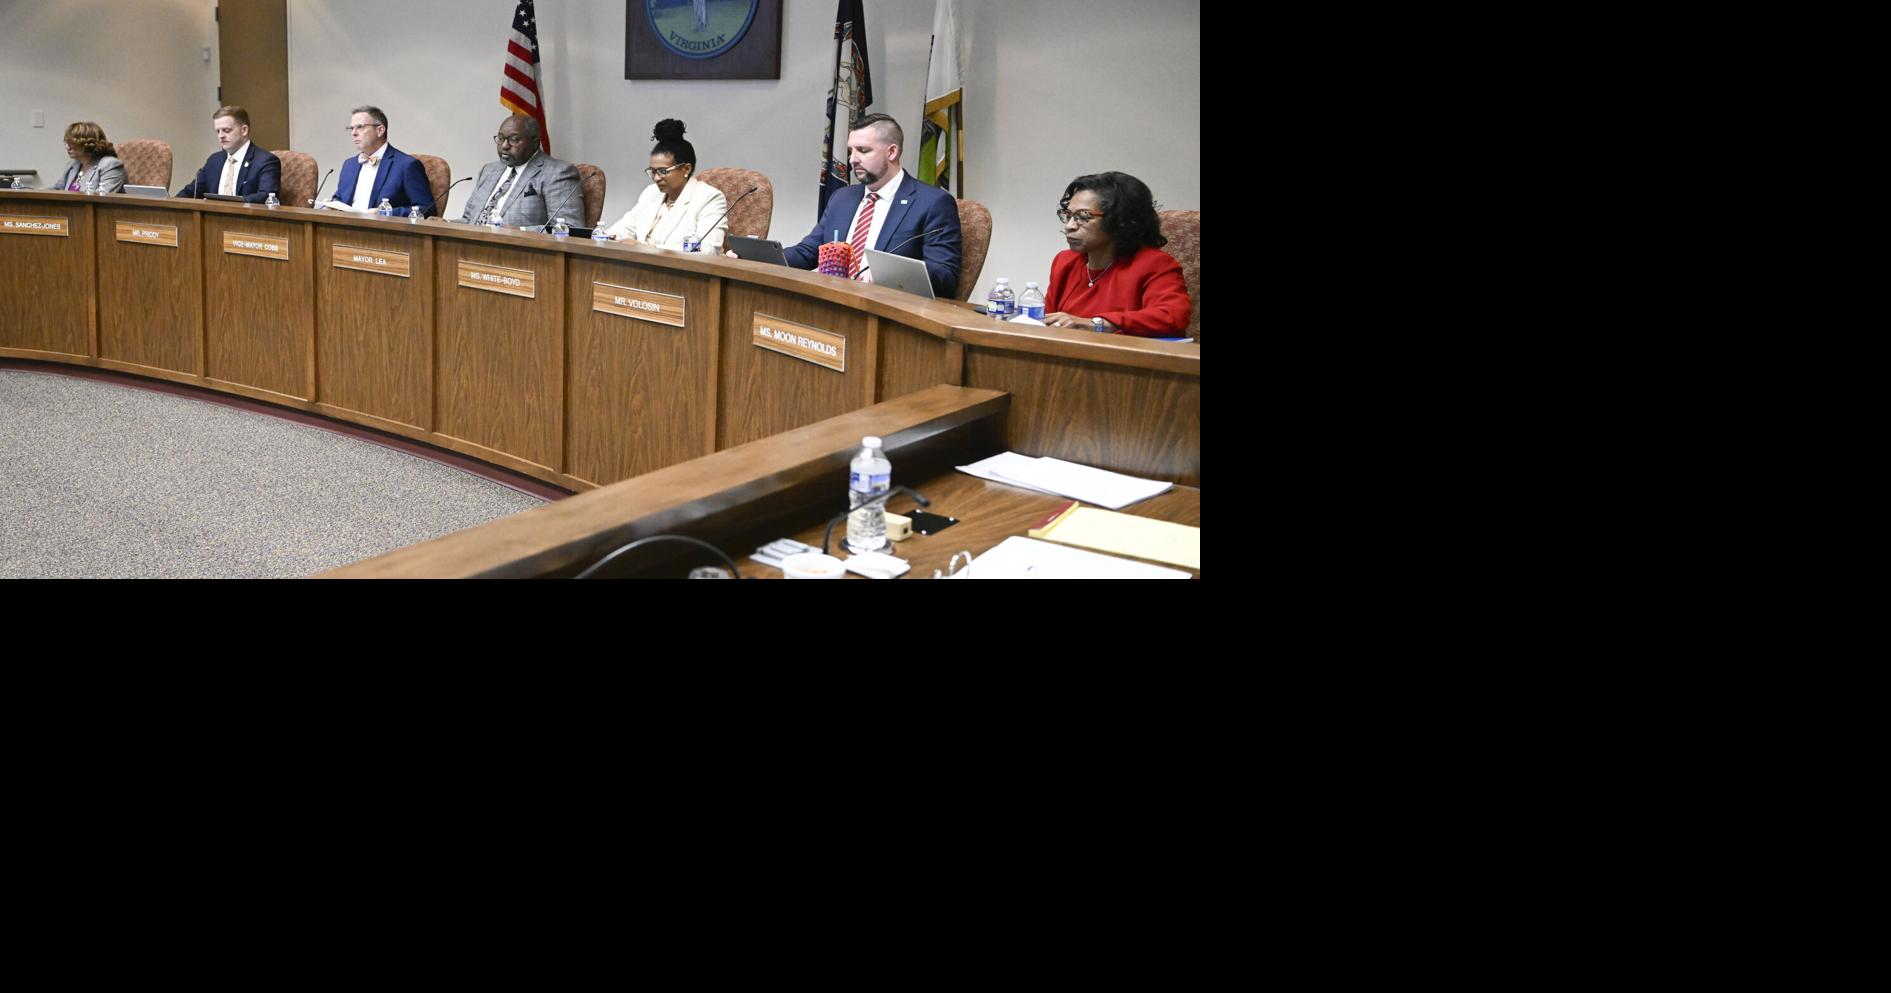 City manager latest important decision for Roanoke City Council Photo